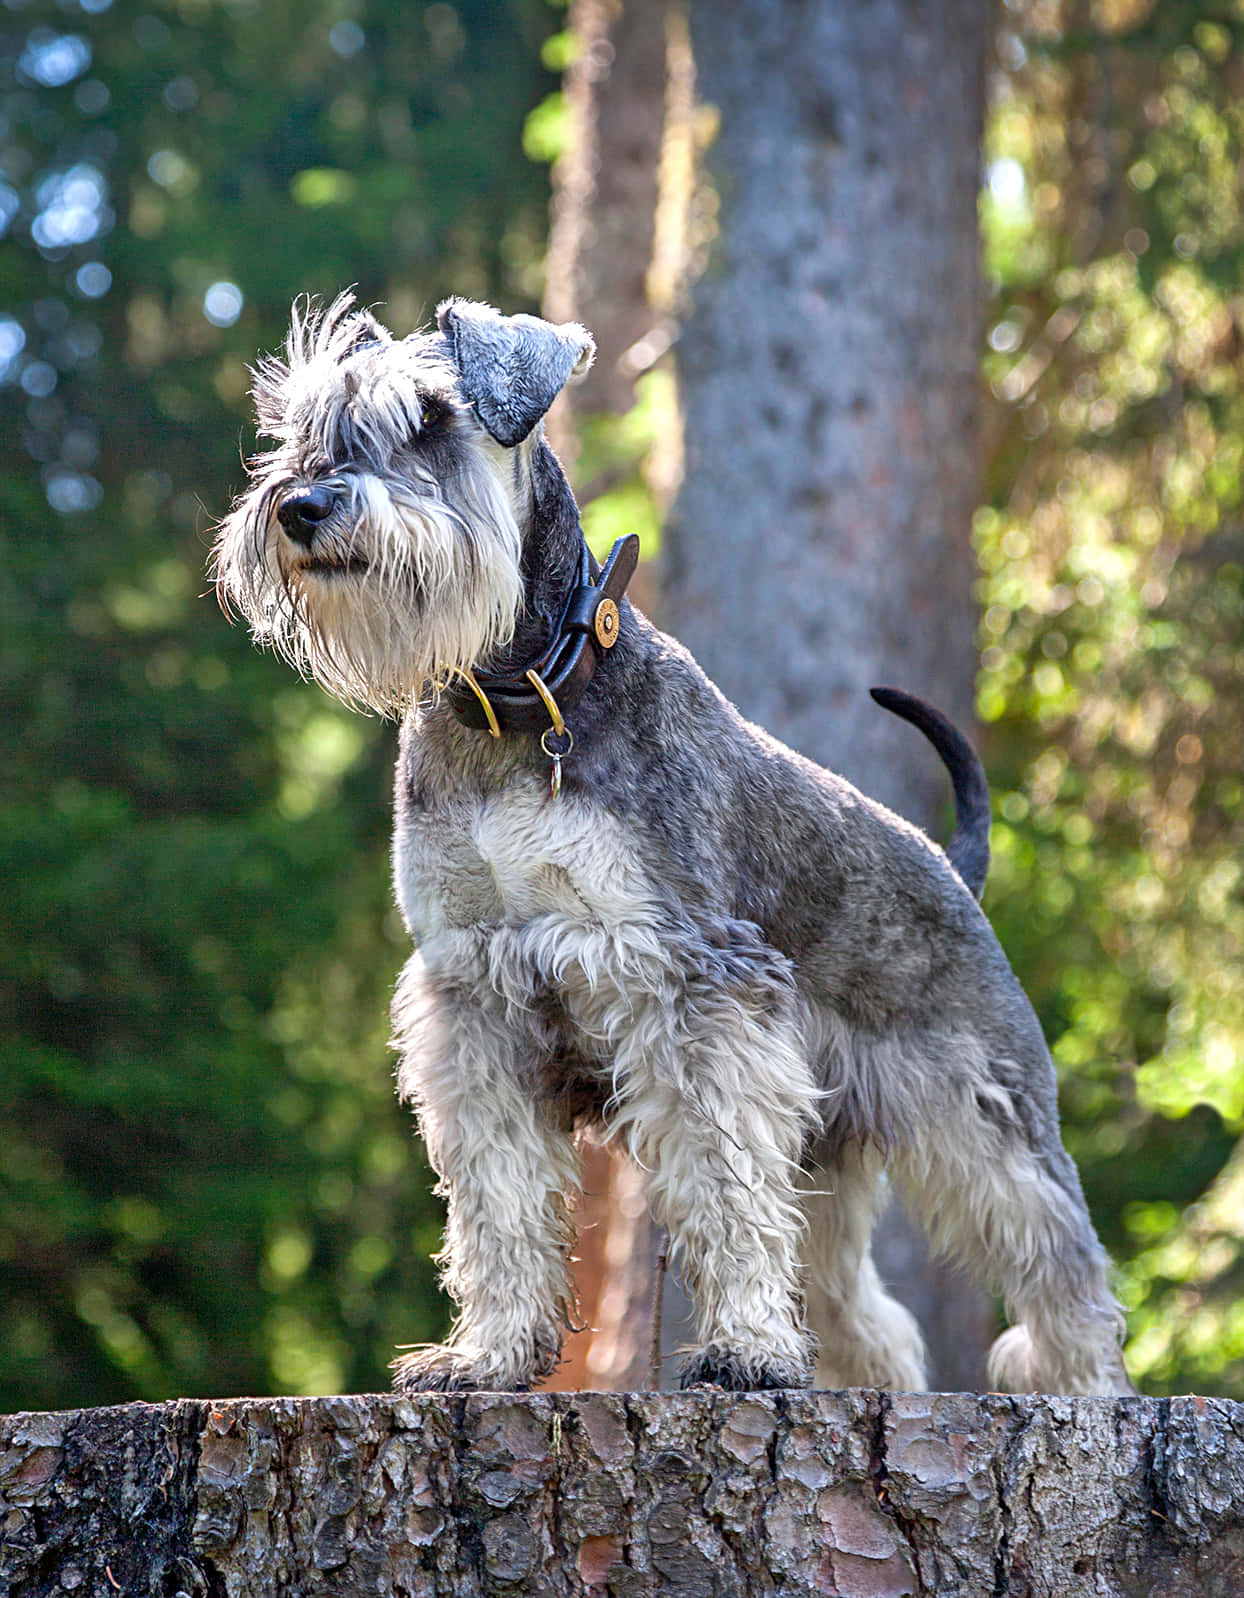 Bright-Eyed Schnauzer Playfully Engages with its Owner